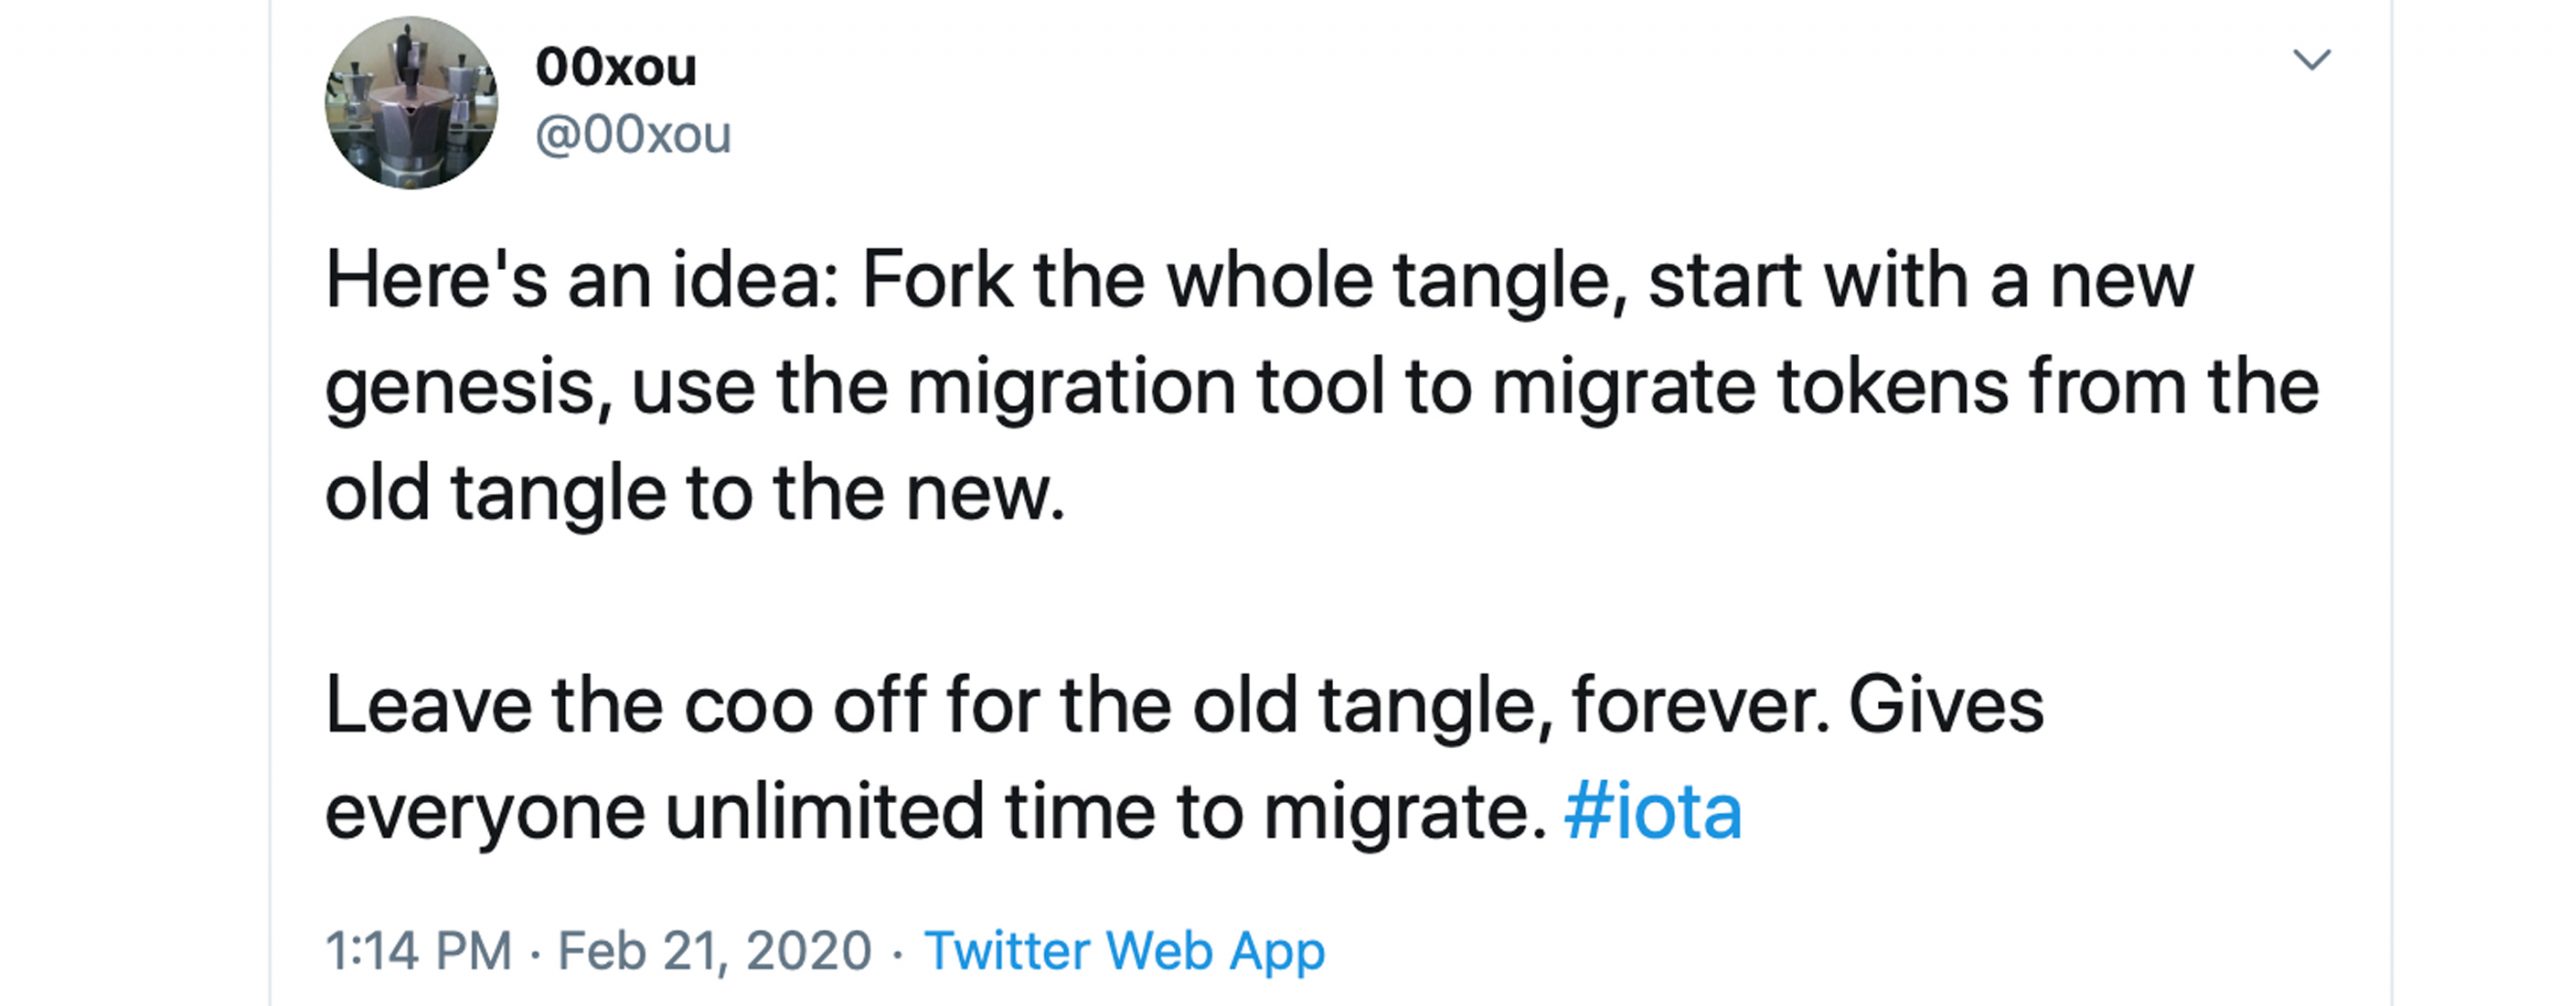 IOTA Network Down for 11 Days - Devs Claim Mainnet Will Be Operational Next Month